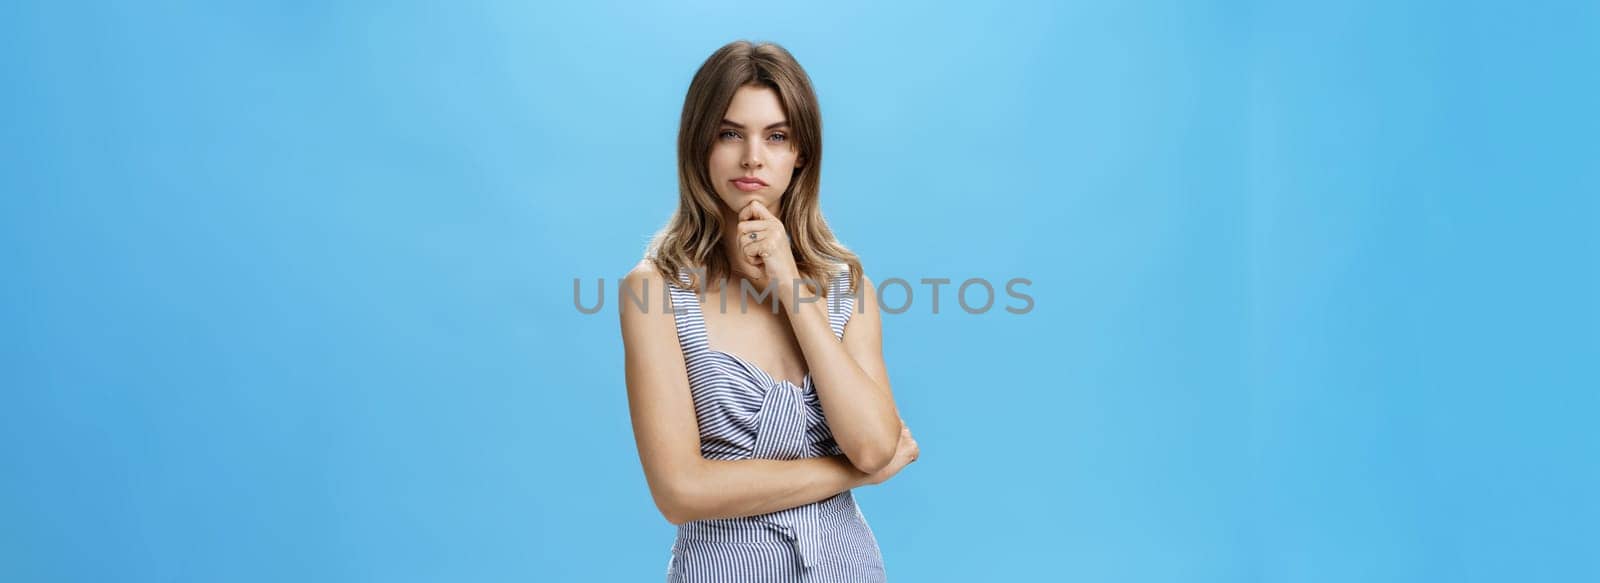 Girl using deductive method to solve mystery standing in thoughtful serious pose touching chin squinting seriously at camera and frowning thinking what decision make over blue background. People, gestures and emotions concept